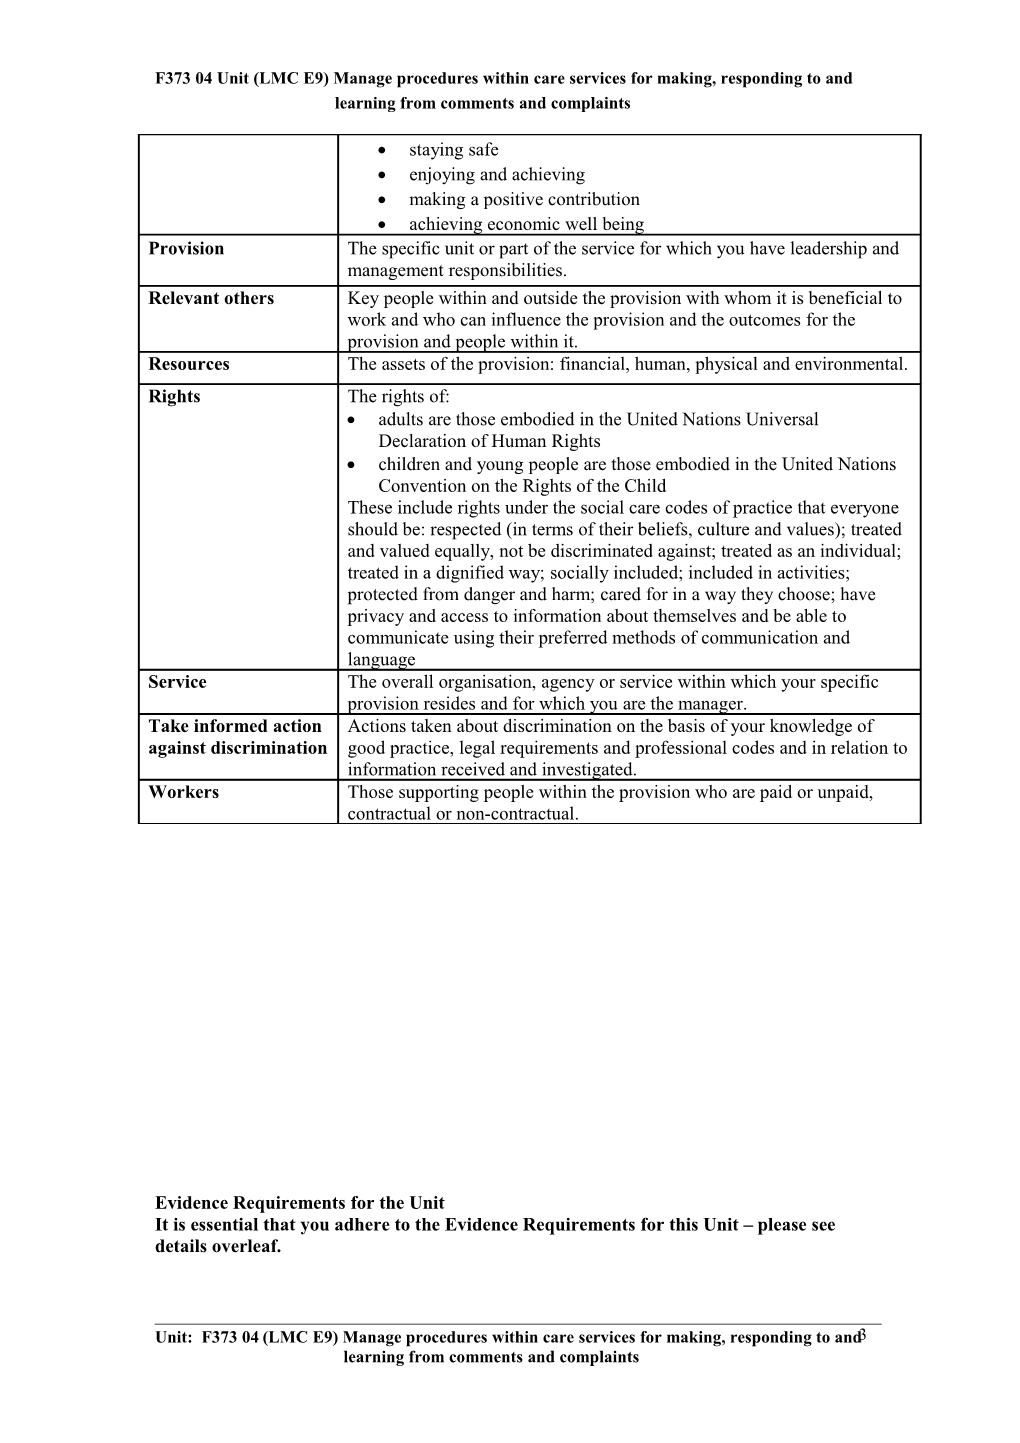 F373 04 Unit (LMC E9) Manage Procedures Within Care Services for Making, Responding to And